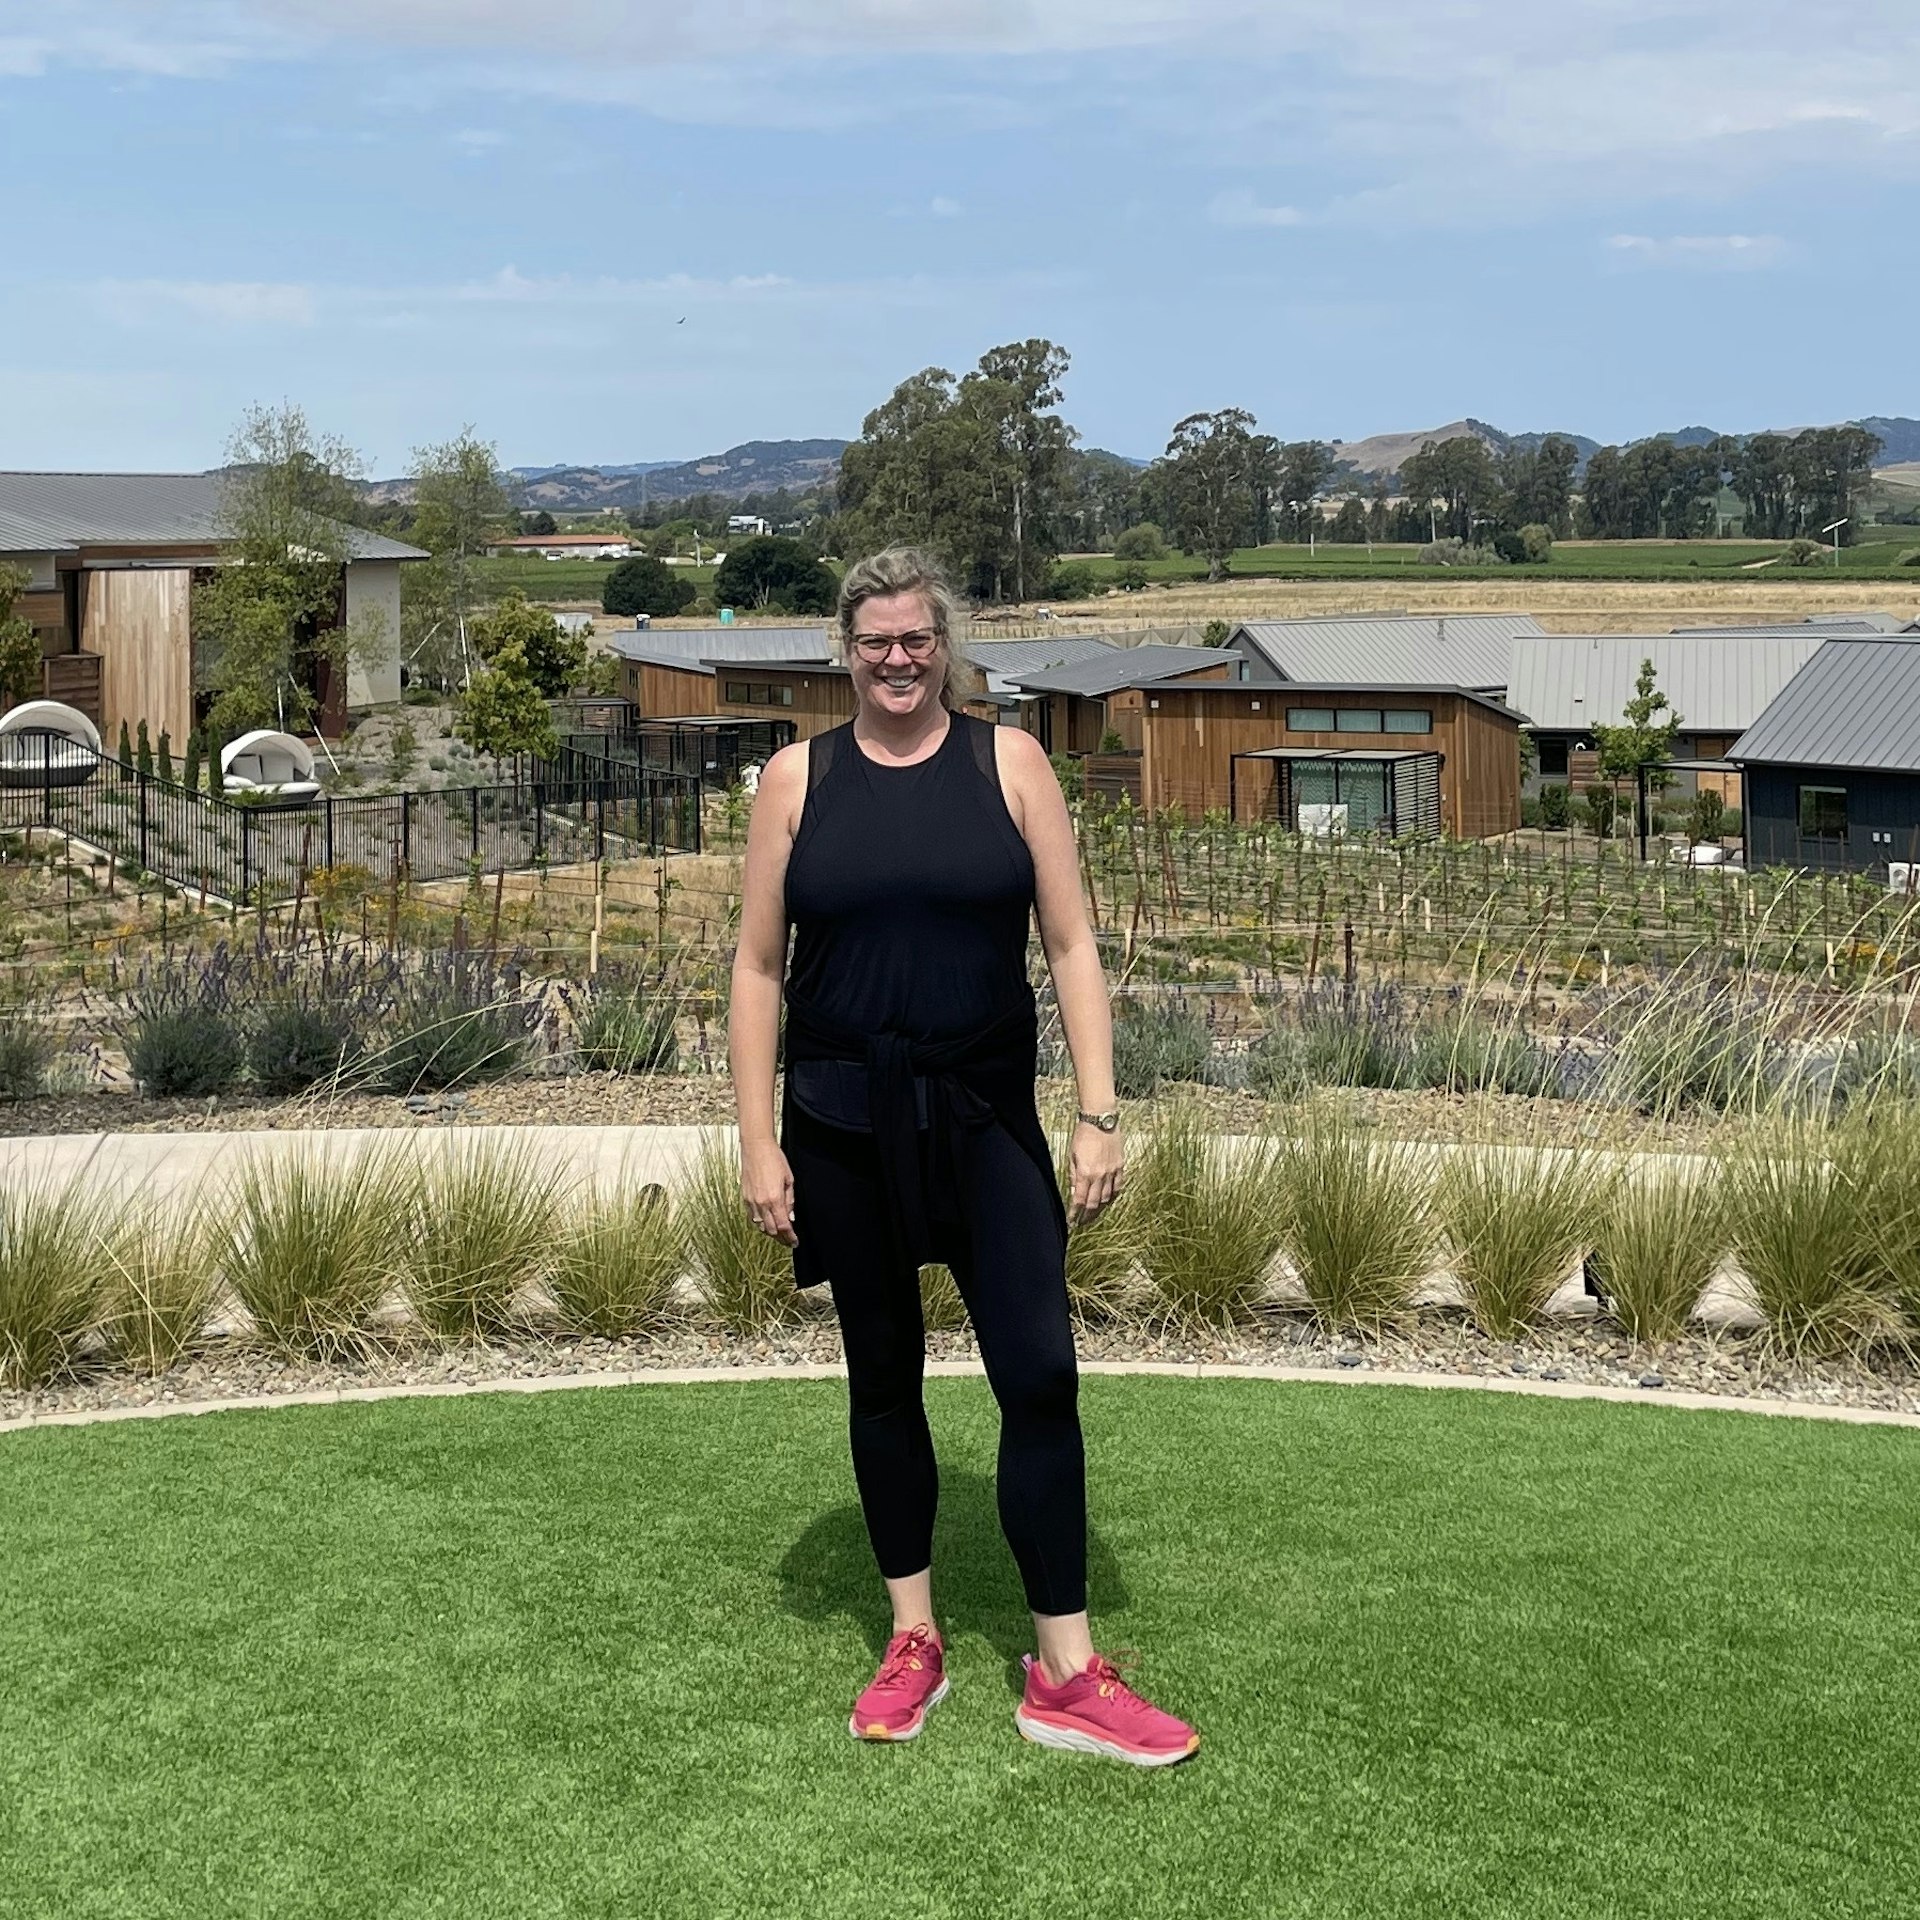 Brekke Fletcher stands on a lawn in Napa, California, with the landscape stretching out beyond the cluster of low-rise buildings directly behind